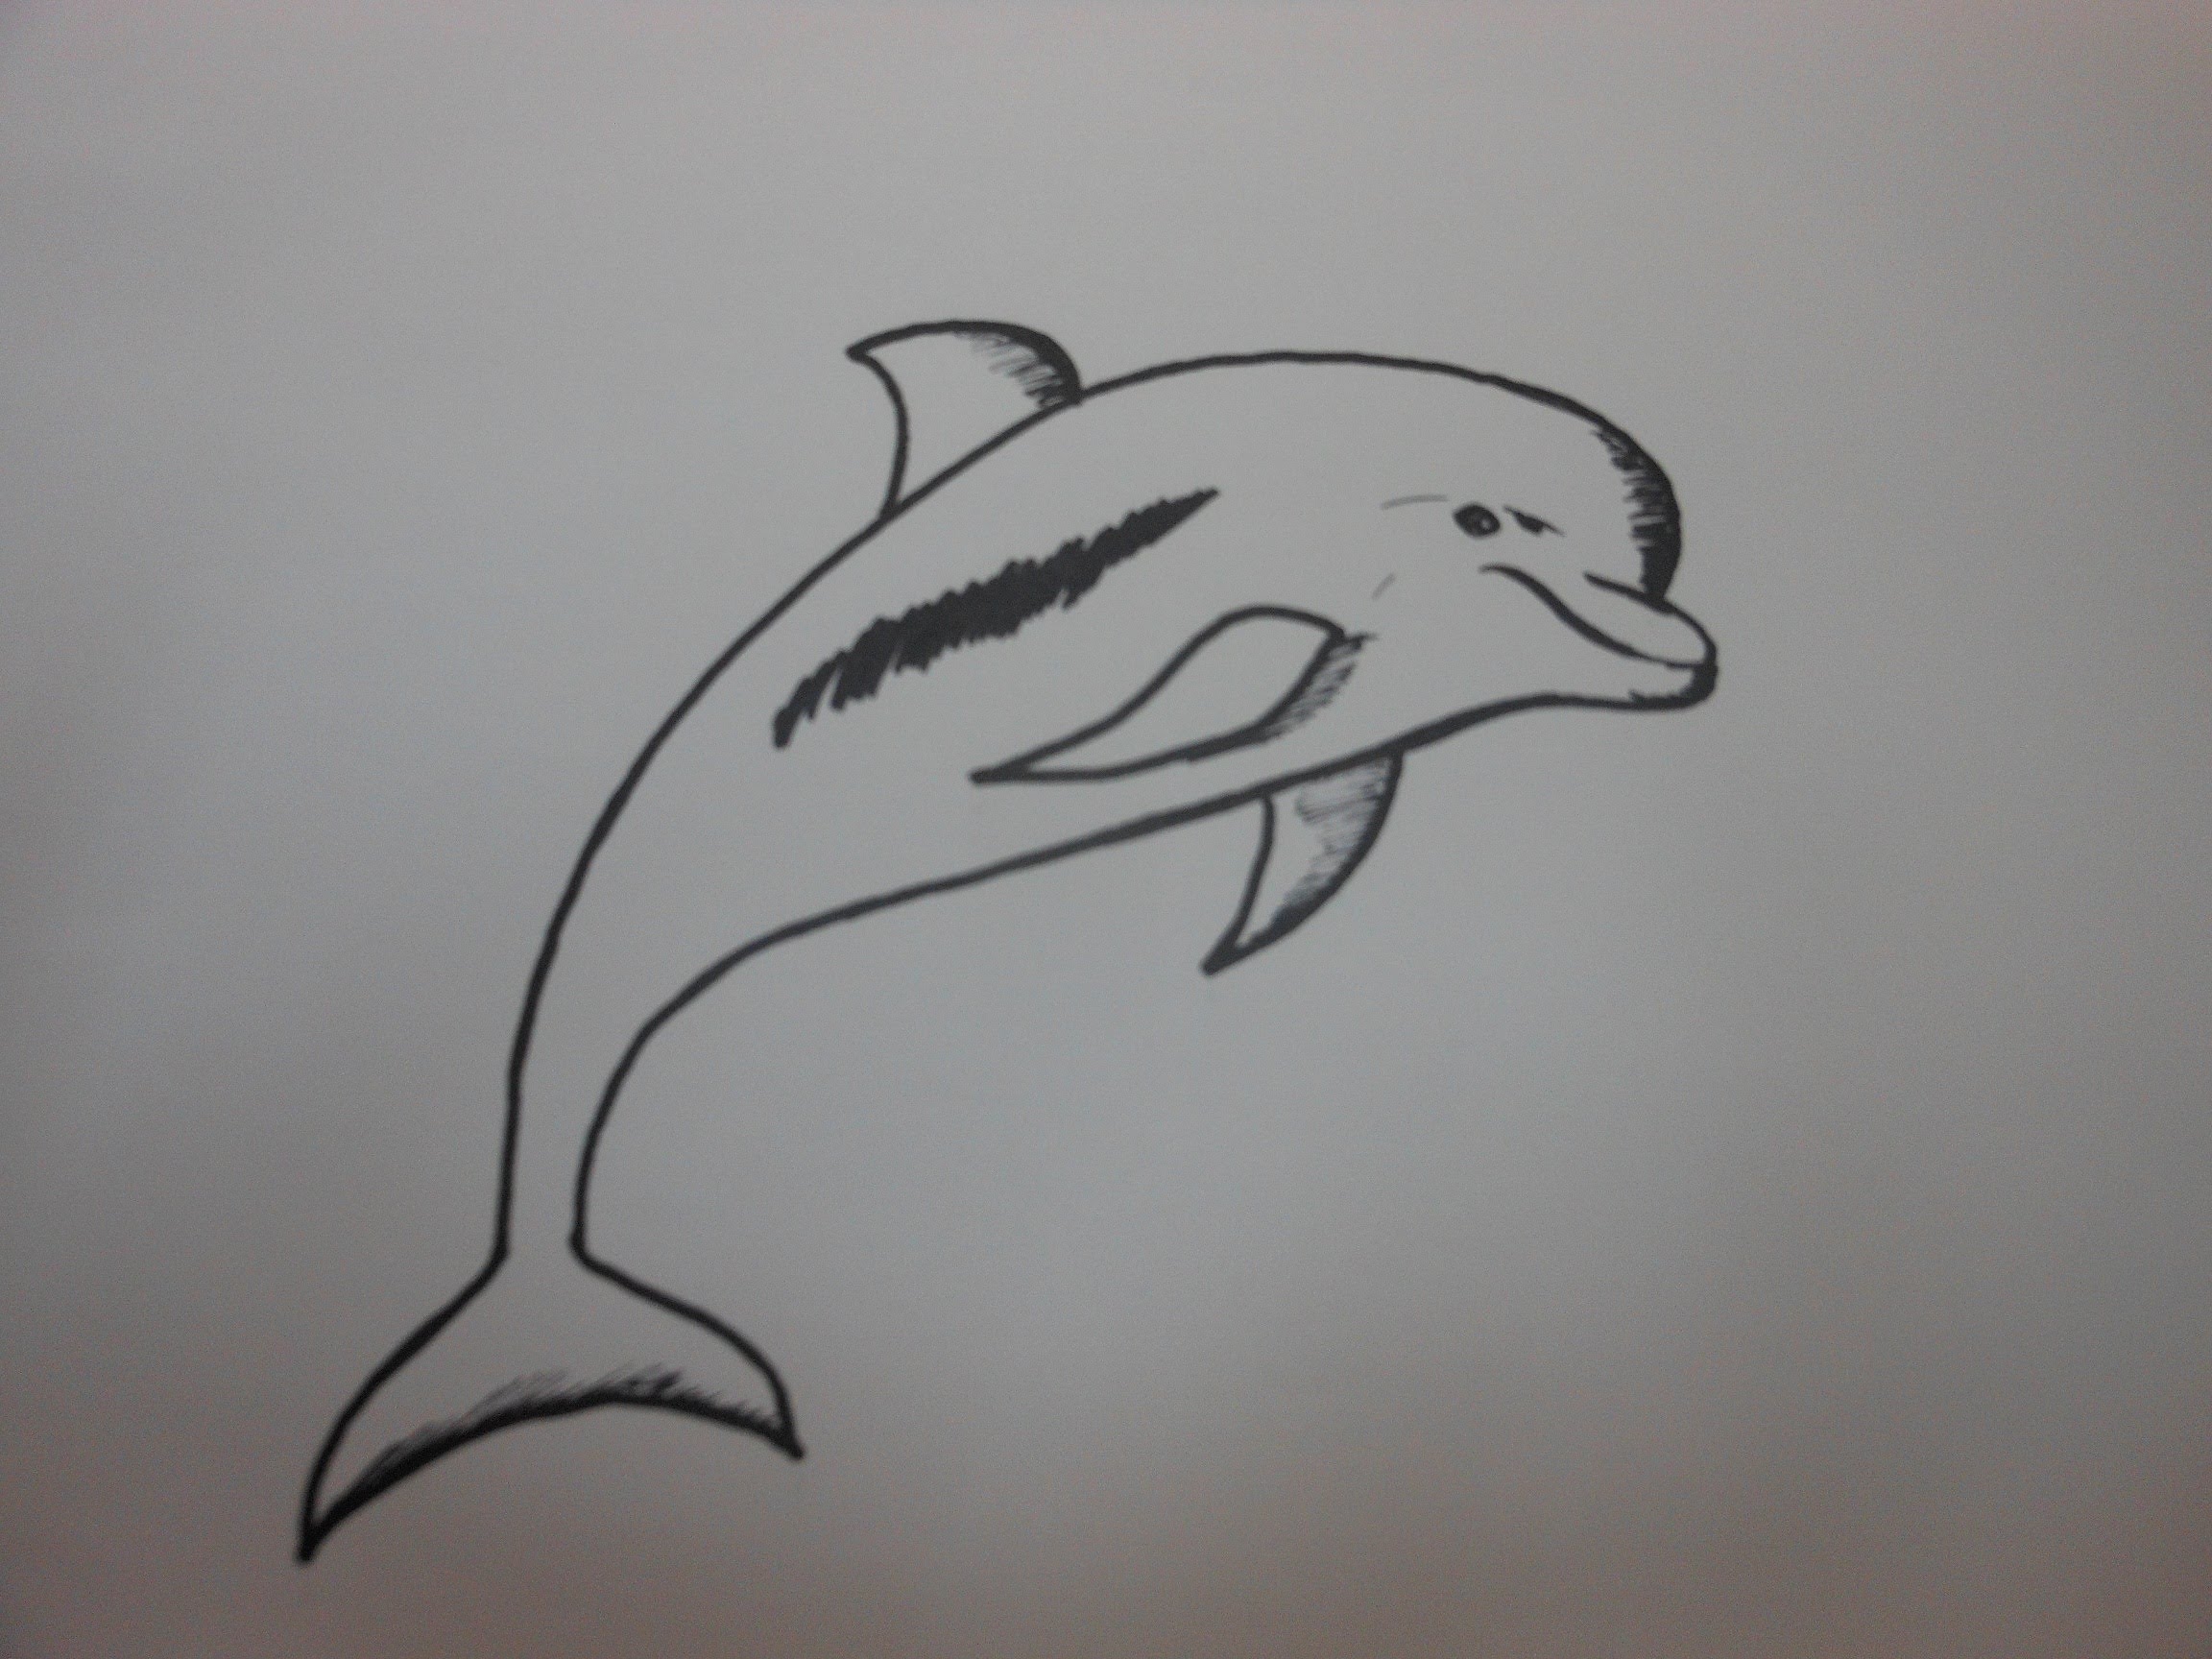 How to draw a dolphin - step by step tutorial - YouTube